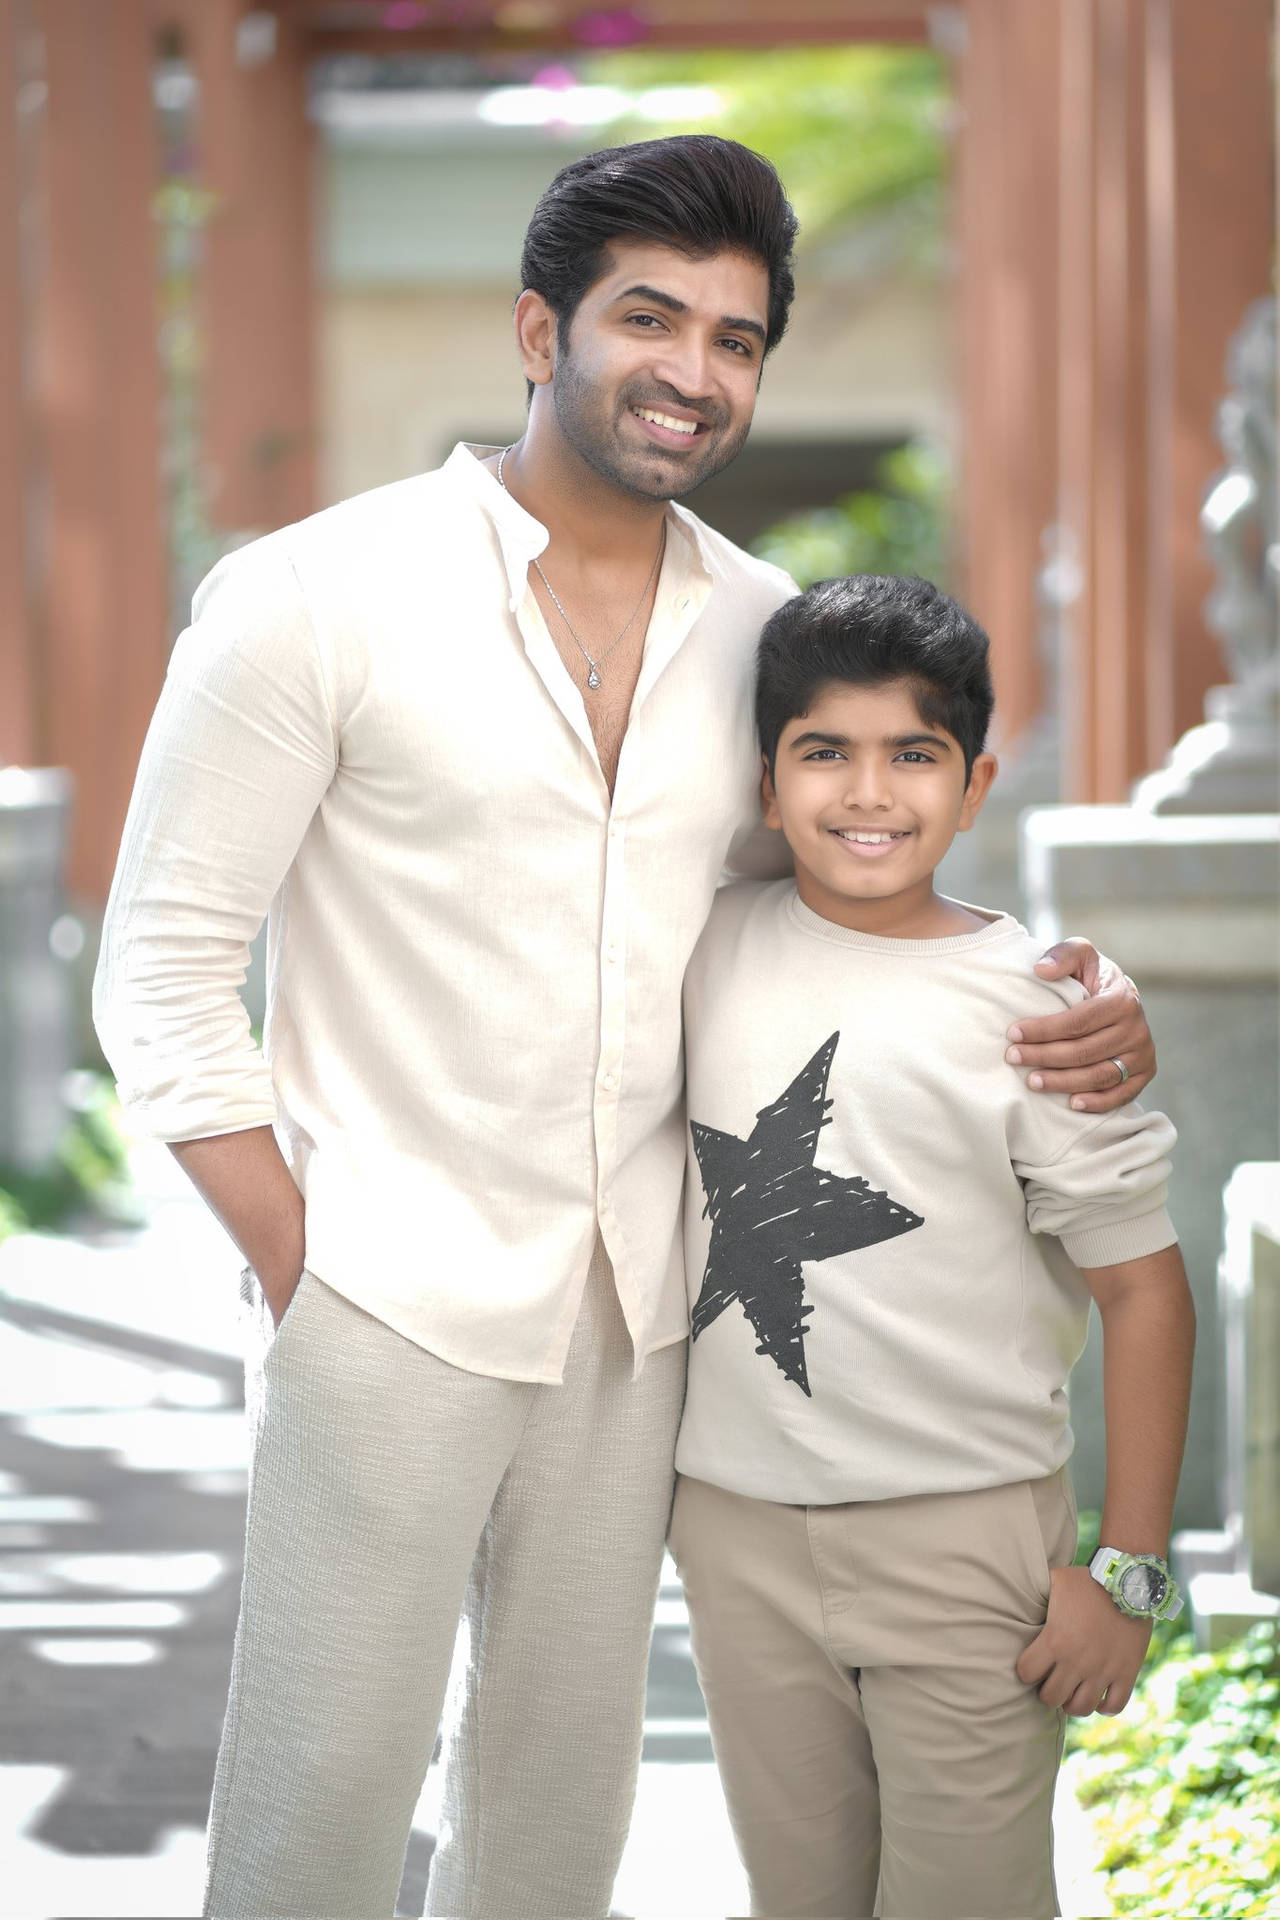 Arun Vijay Poses With A Young Fan Background